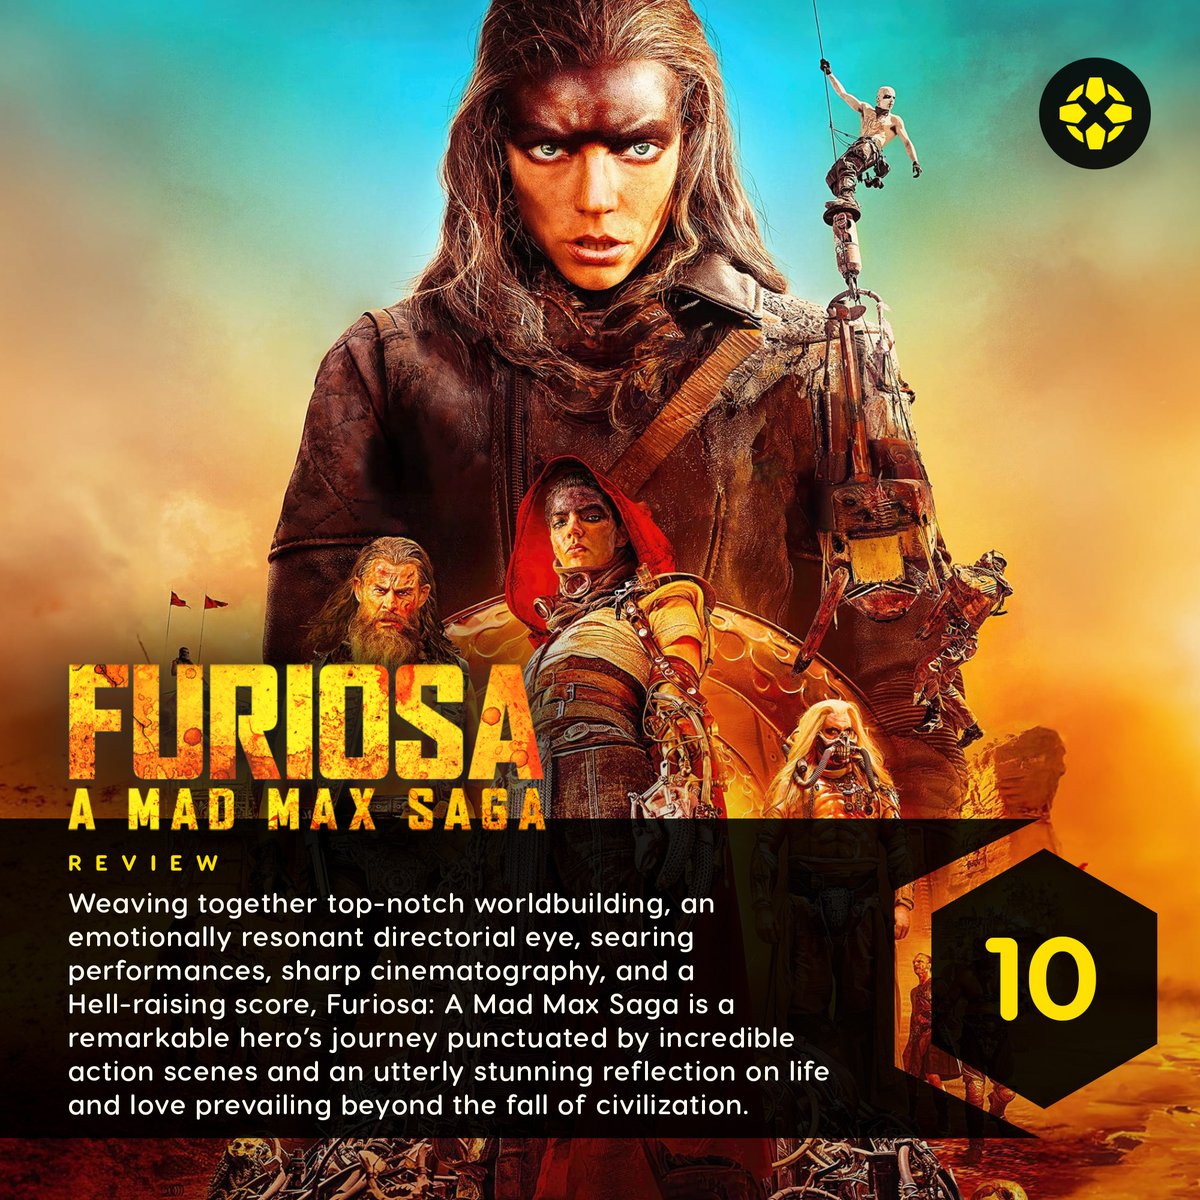 It’s hard to overstate how immaculately crafted Furiosa: A Mad Max Saga is, both as a prequel to Mad Max: Fury Road and as a stand-alone story of how the Wasteland created a powerful character. Our review: bit.ly/3yjjHNh